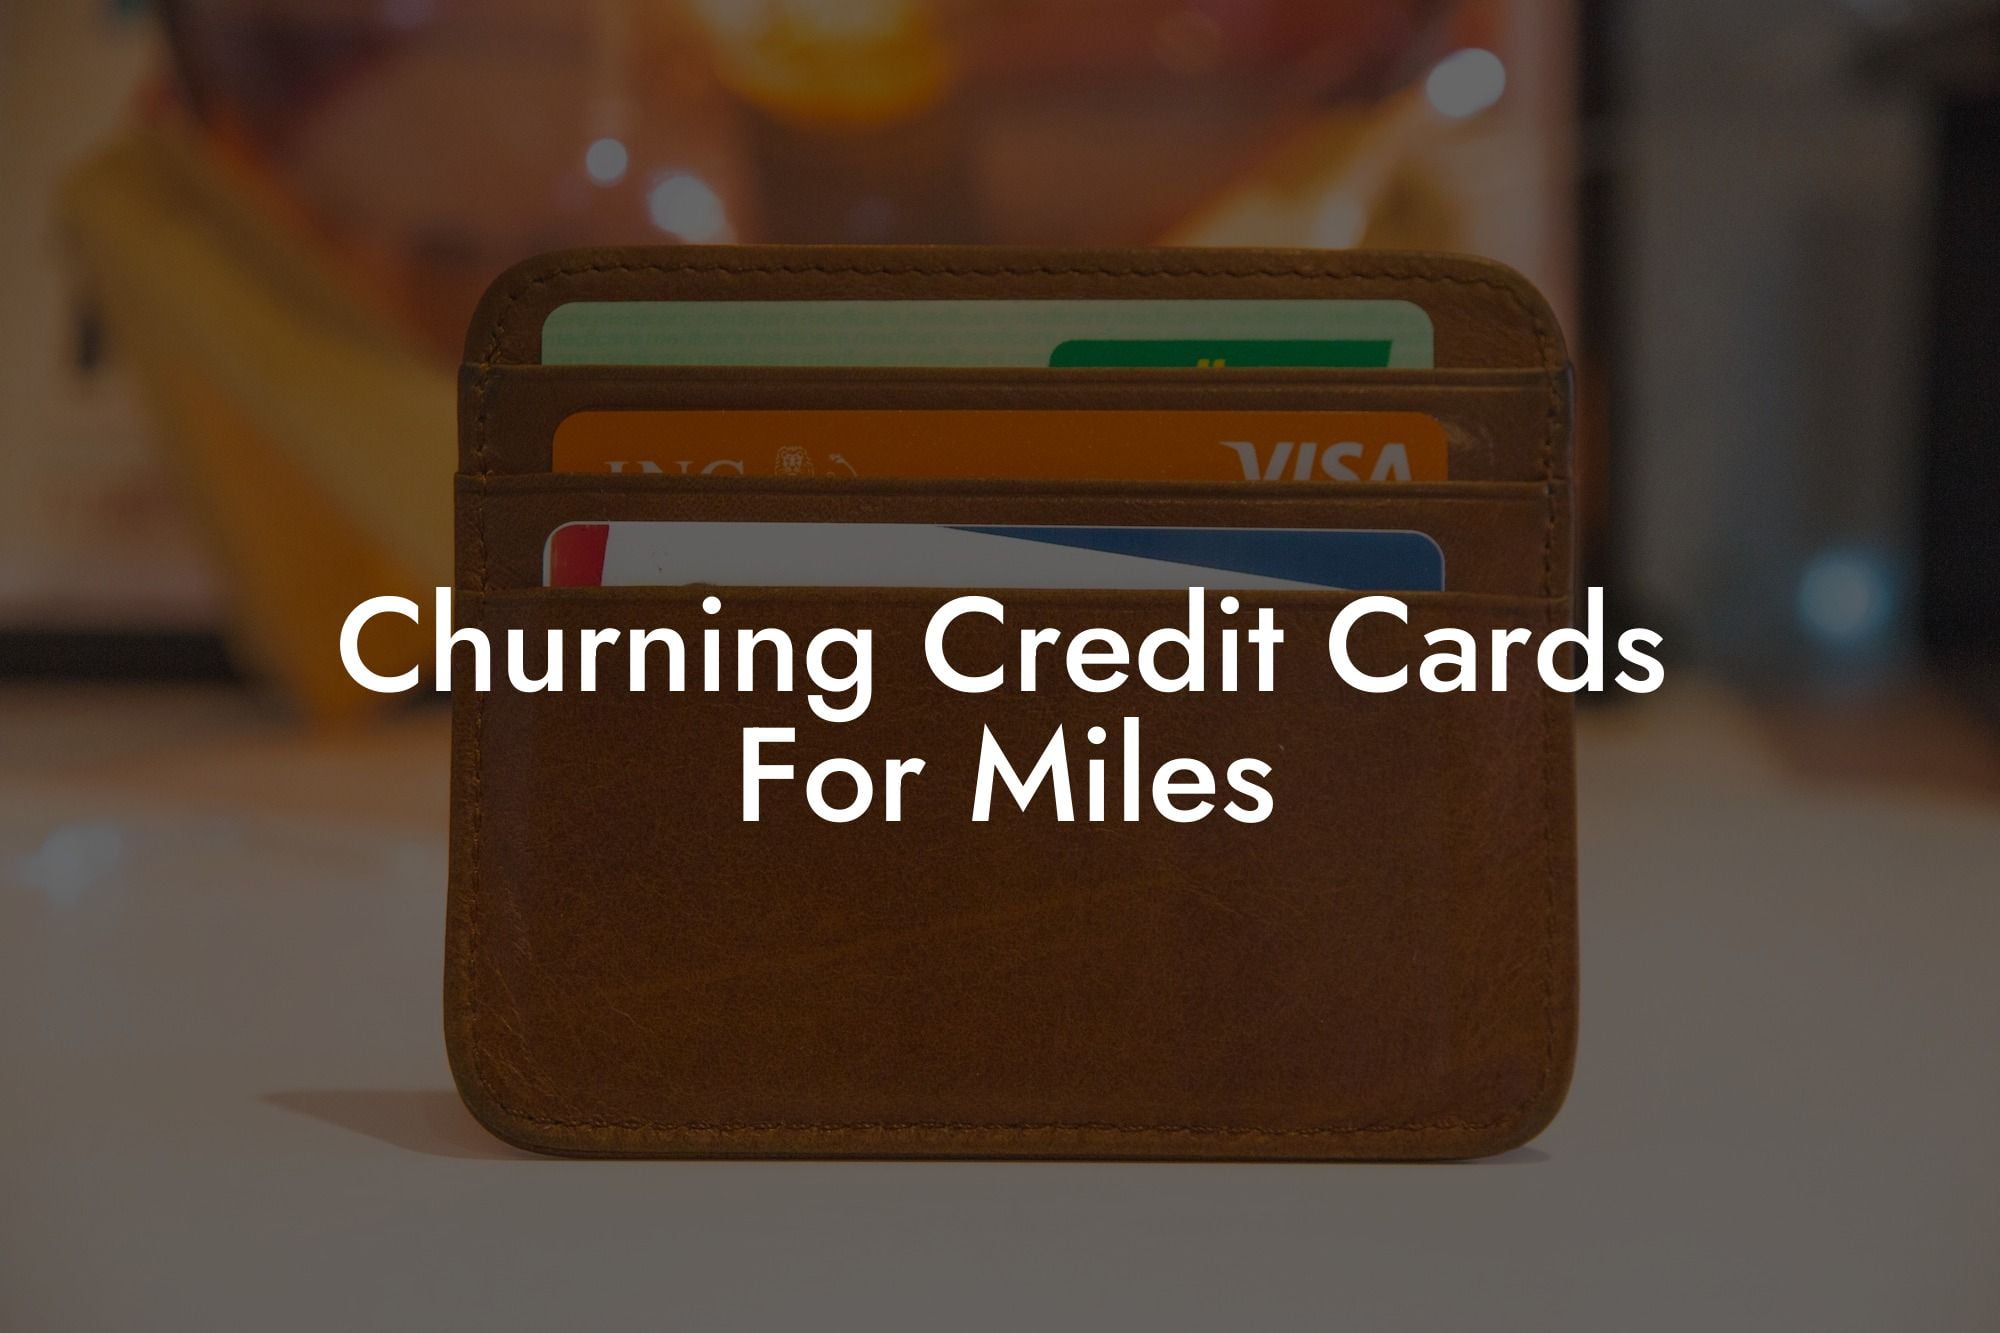 Churning Credit Cards For Miles